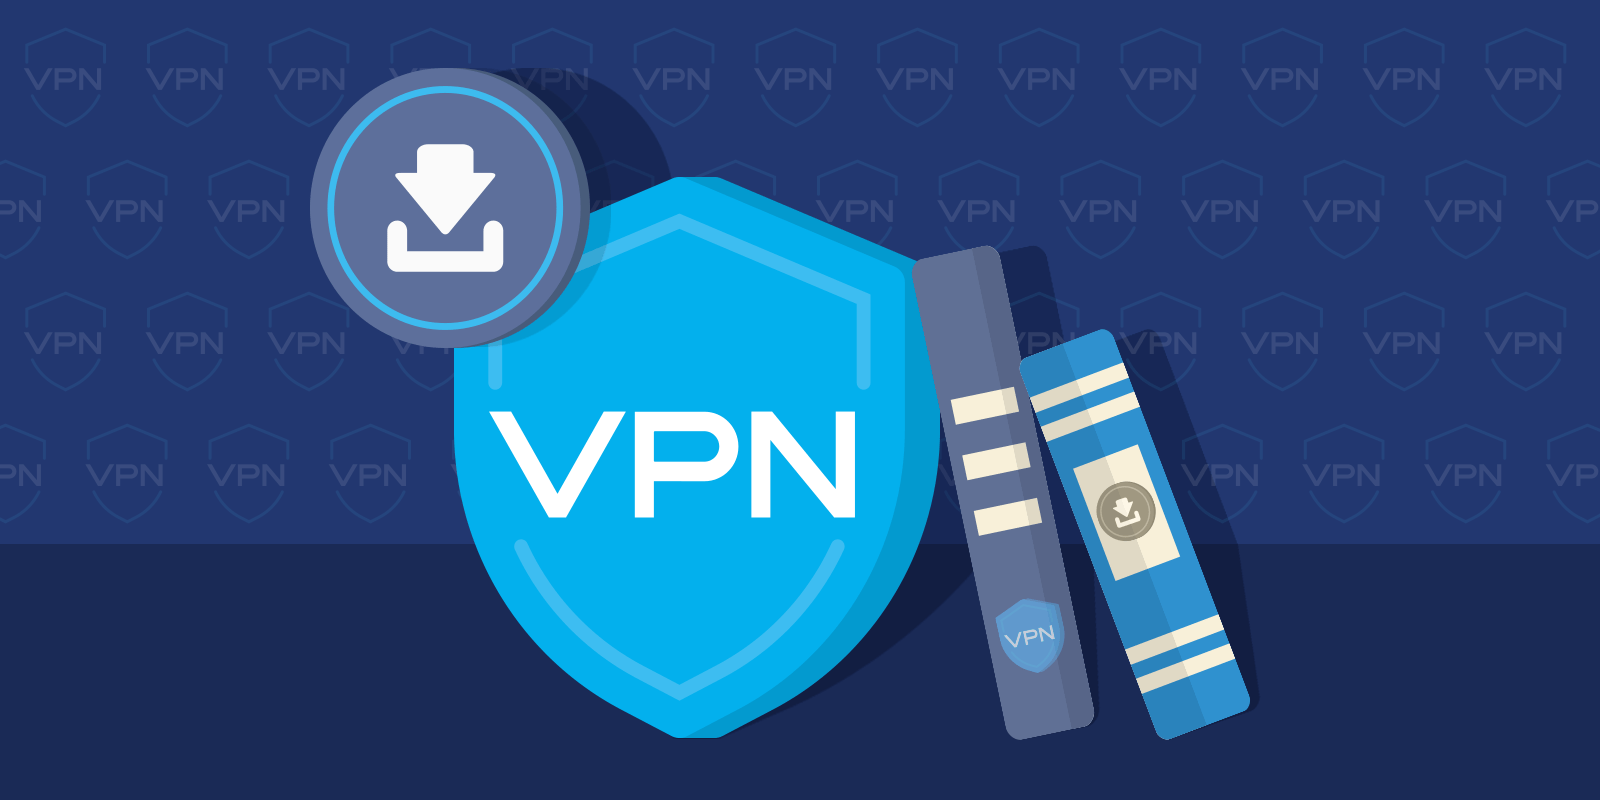 Subscribe to a reputable VPN service.
Download and install the VPN software on your device.